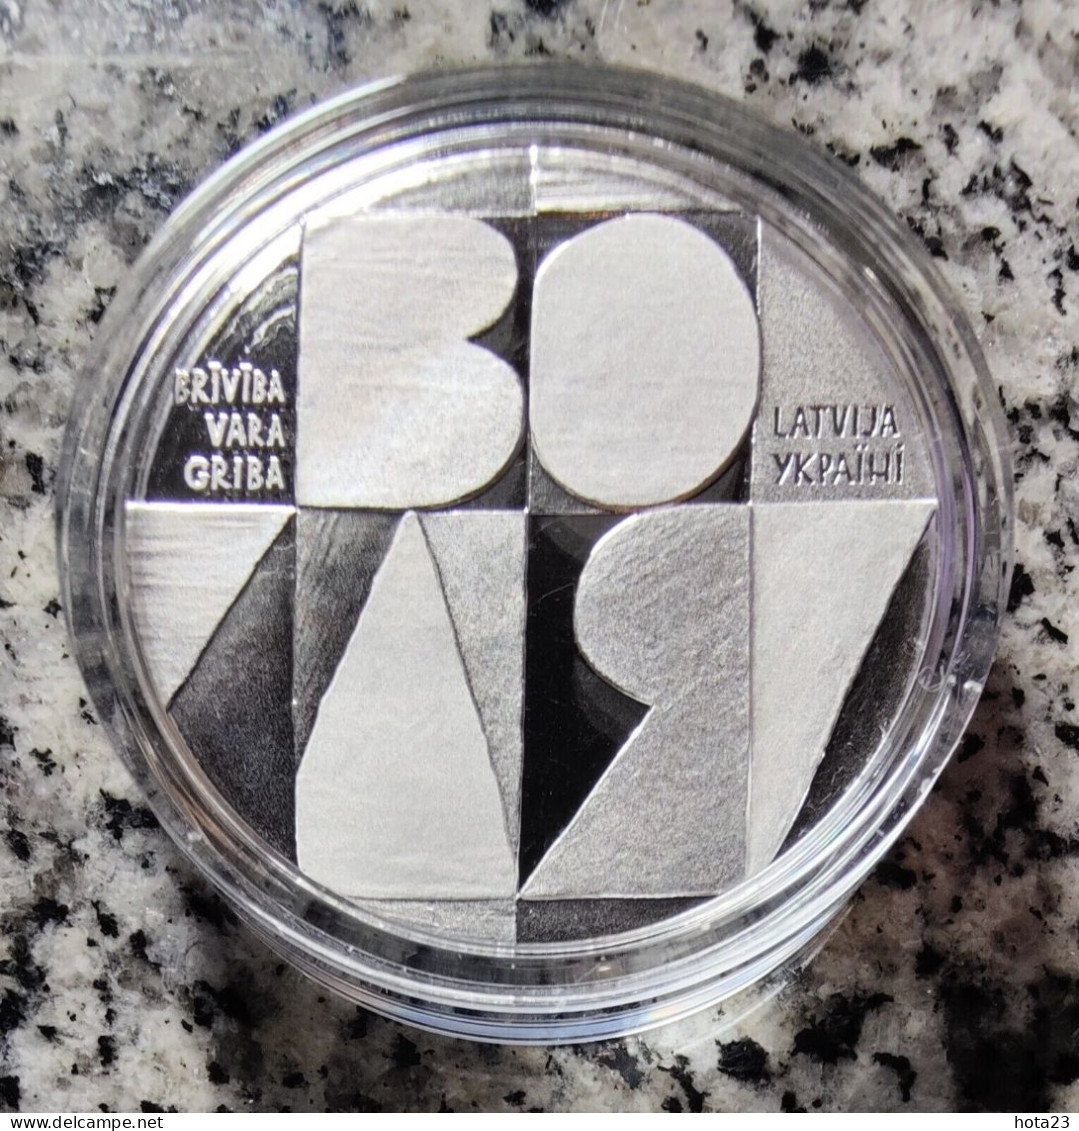 Latvia, Ukraine 5 Euro 2022 Silver Coin Fight For FREEDOM; WILL; POWER PROOF - Latvia